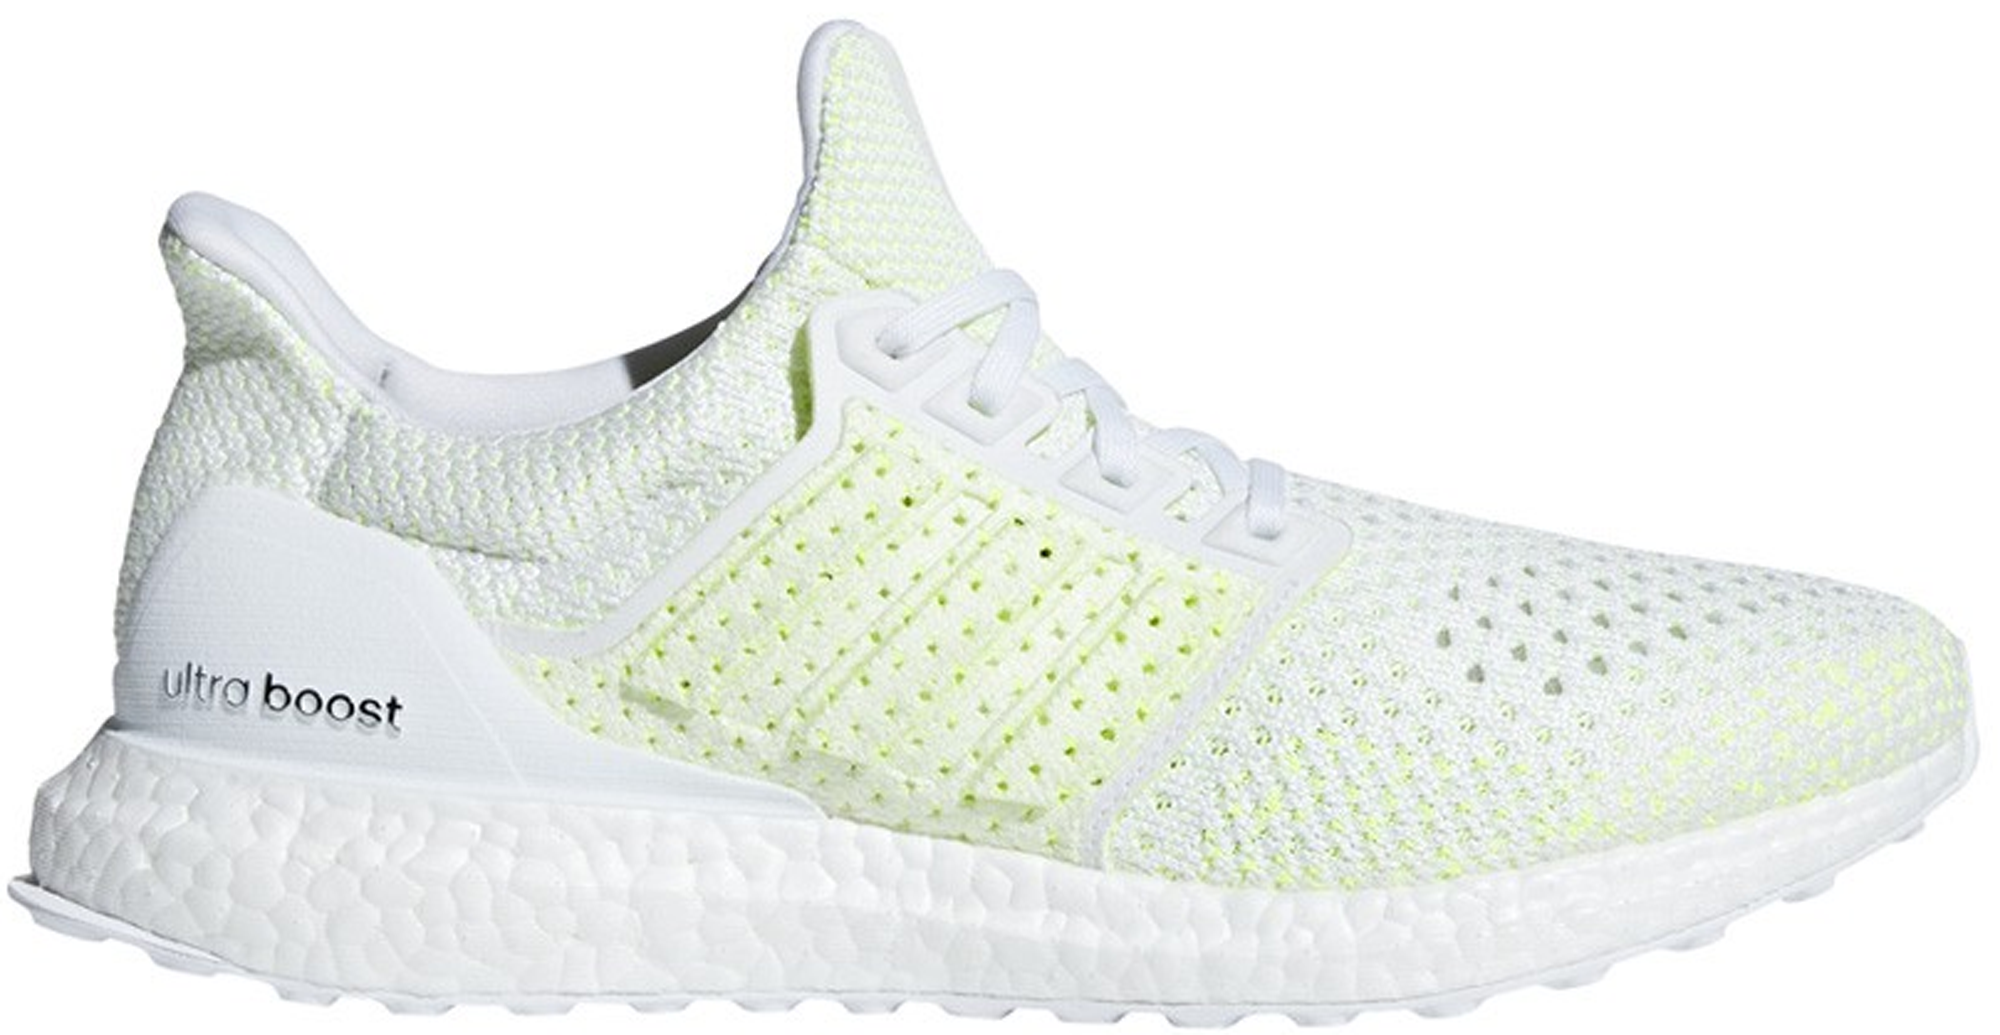 Adidas Ultraboost Clima Running Shoes White Size 5.5